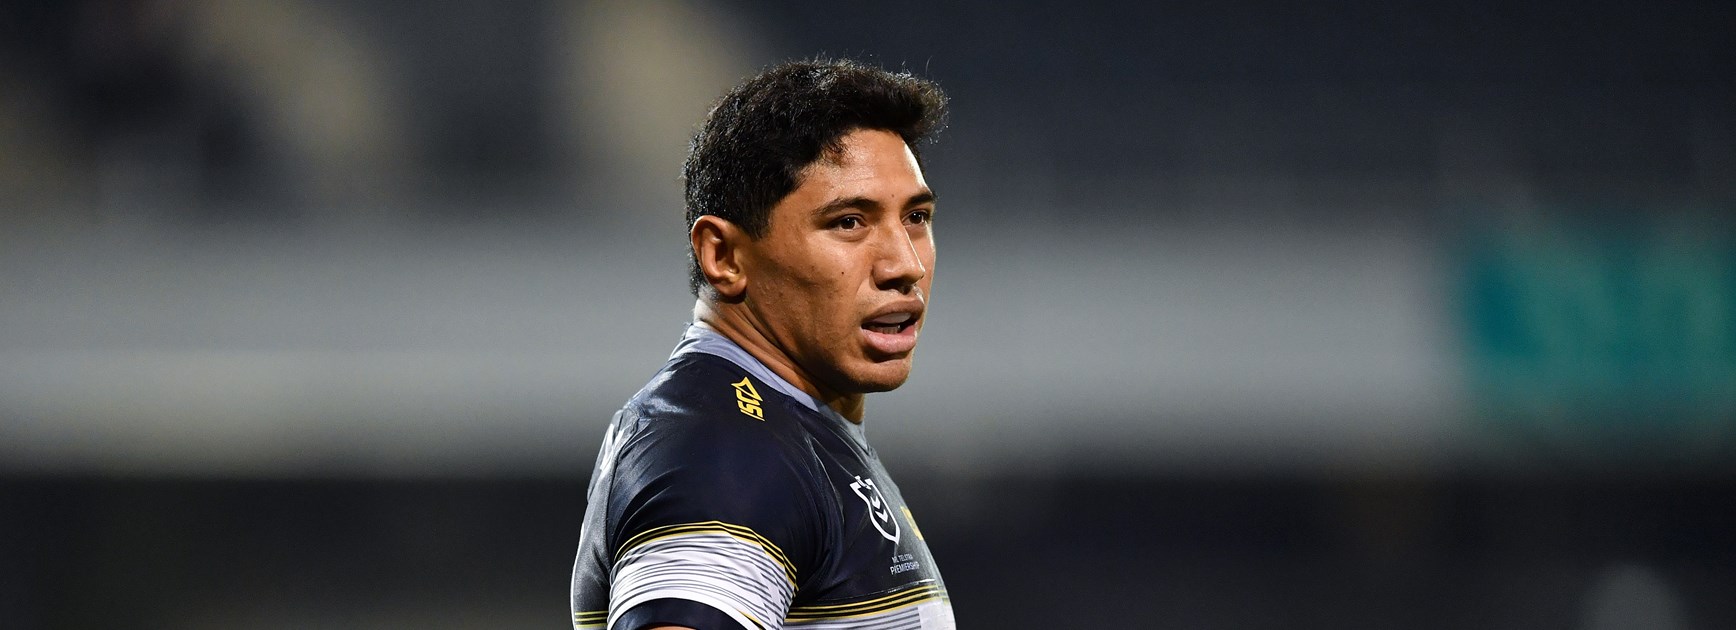 Round 6 Snapshot + Dally M votes: Taumalolo joins Trbojevic at top